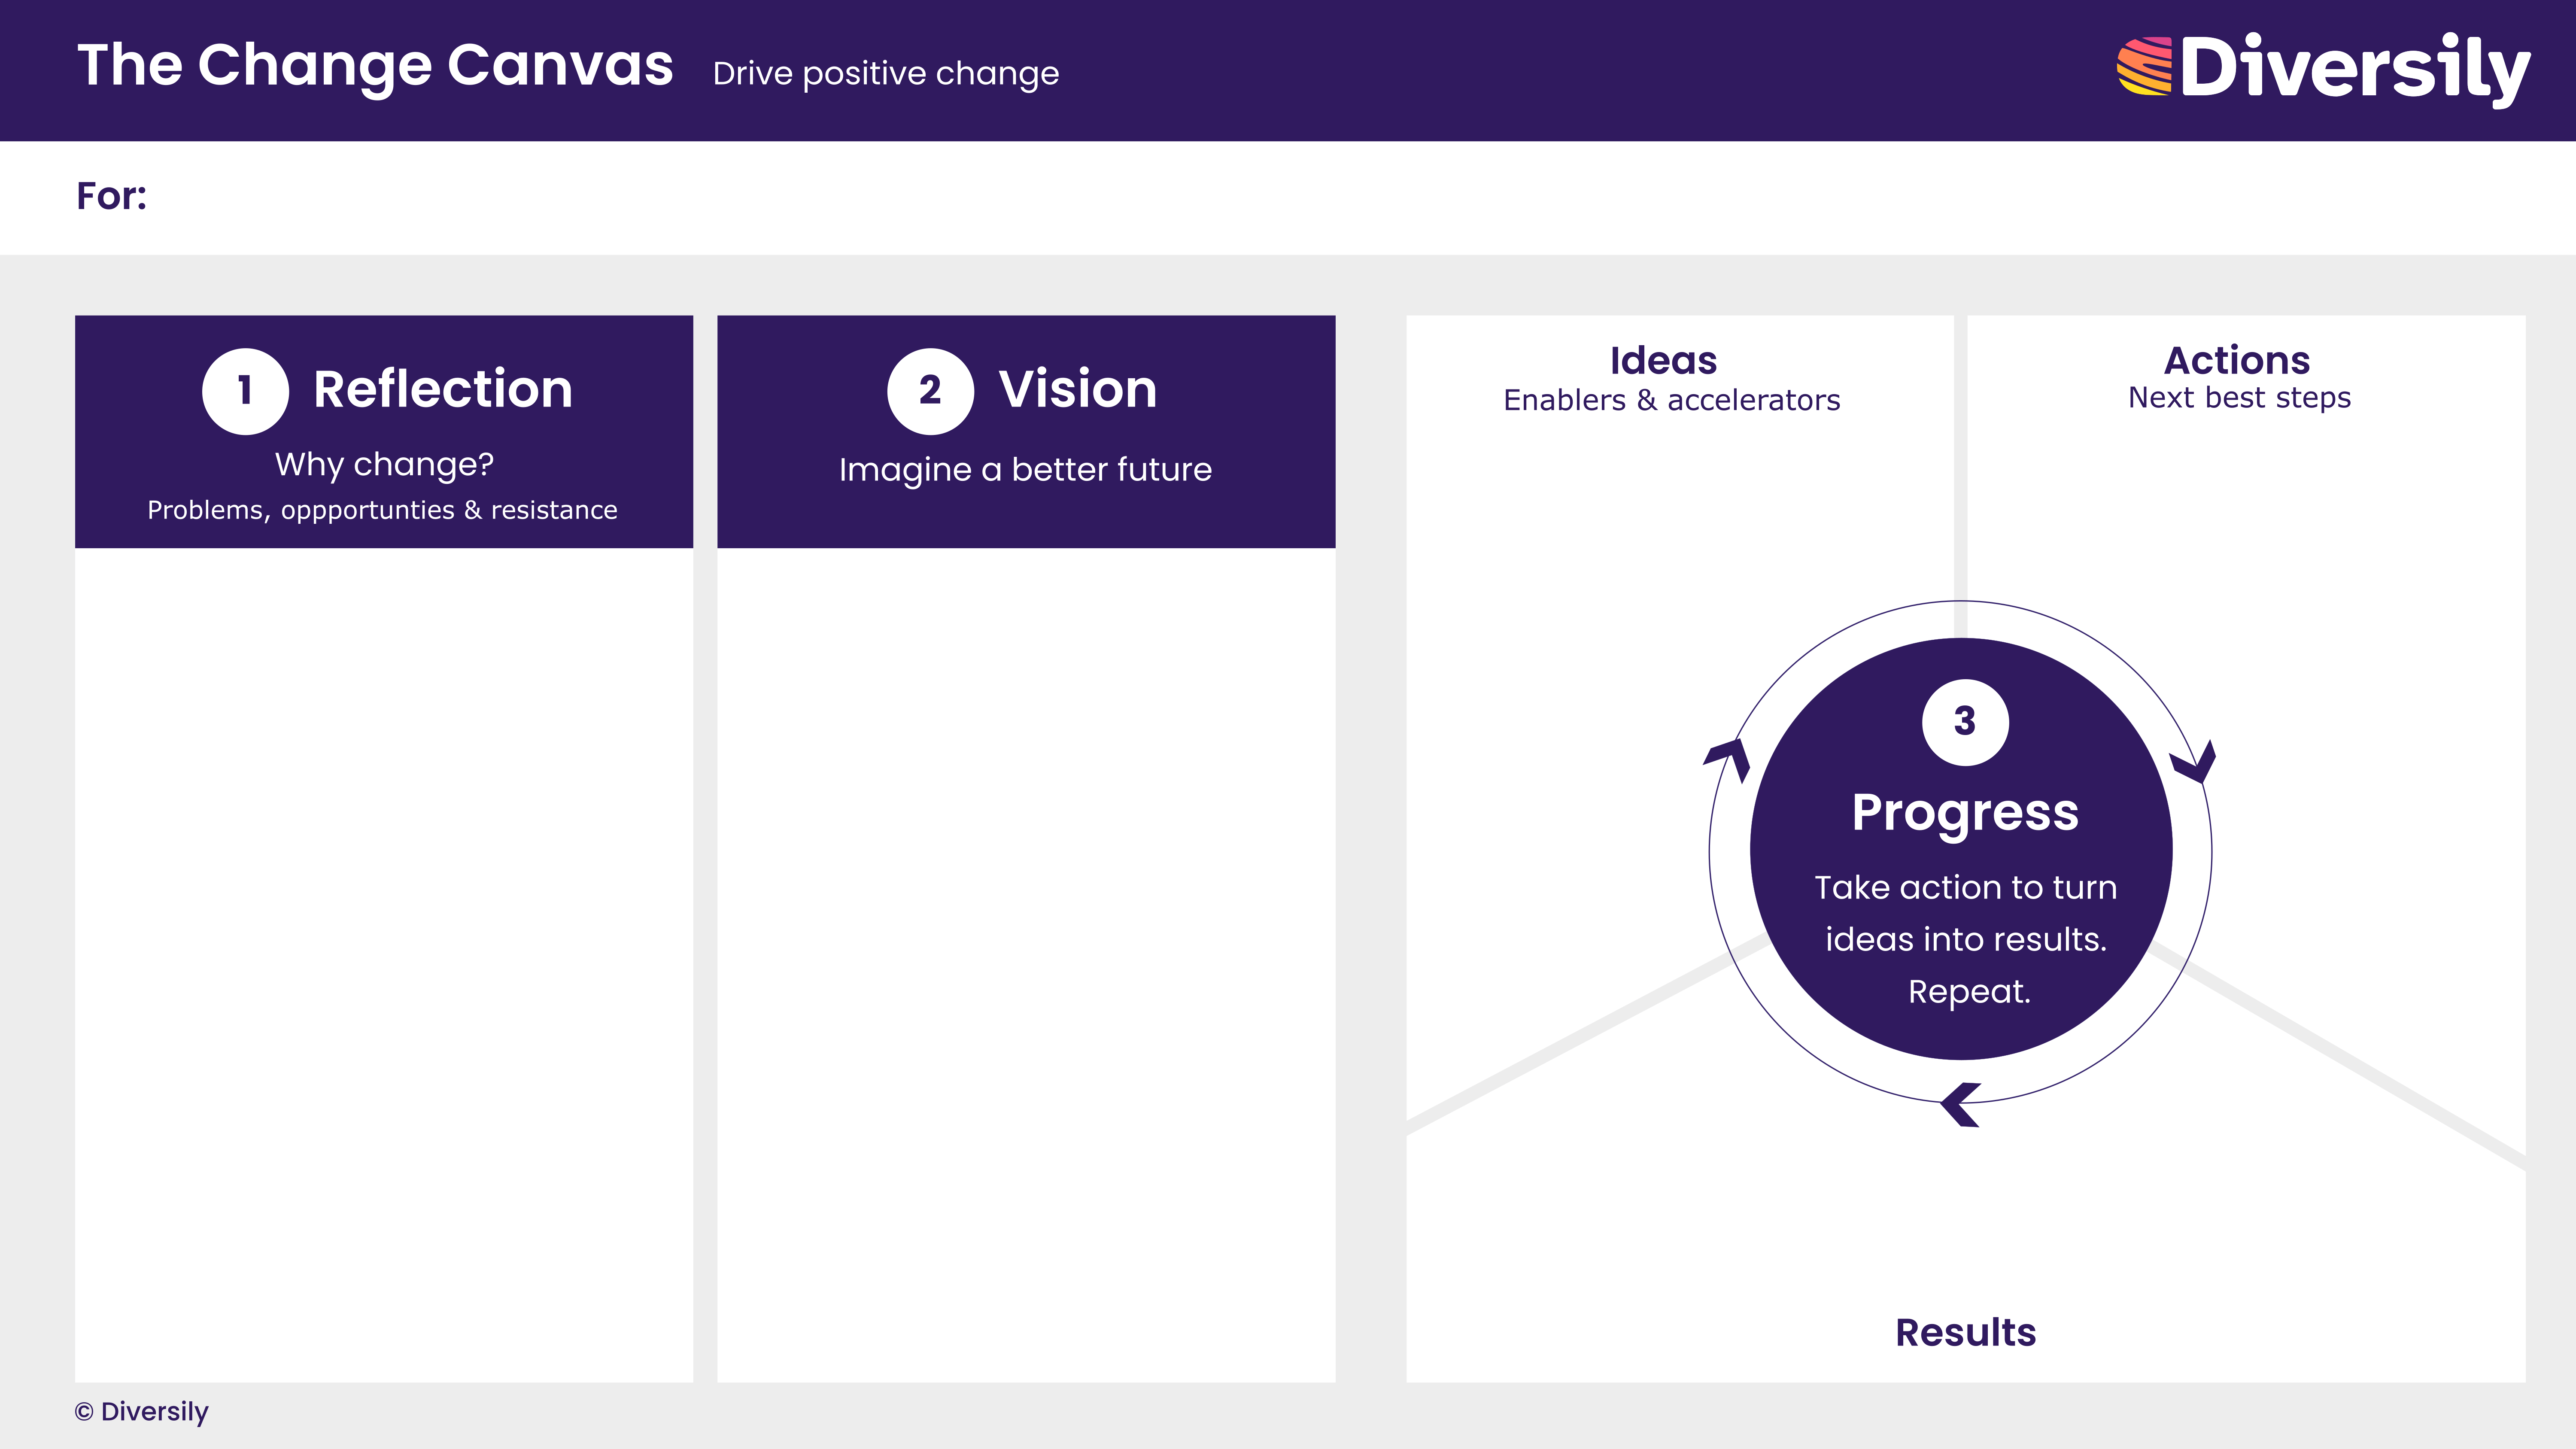 The Change Canvas framework with 5 boards - Reflection, Vision, Ideas, Actions and Results